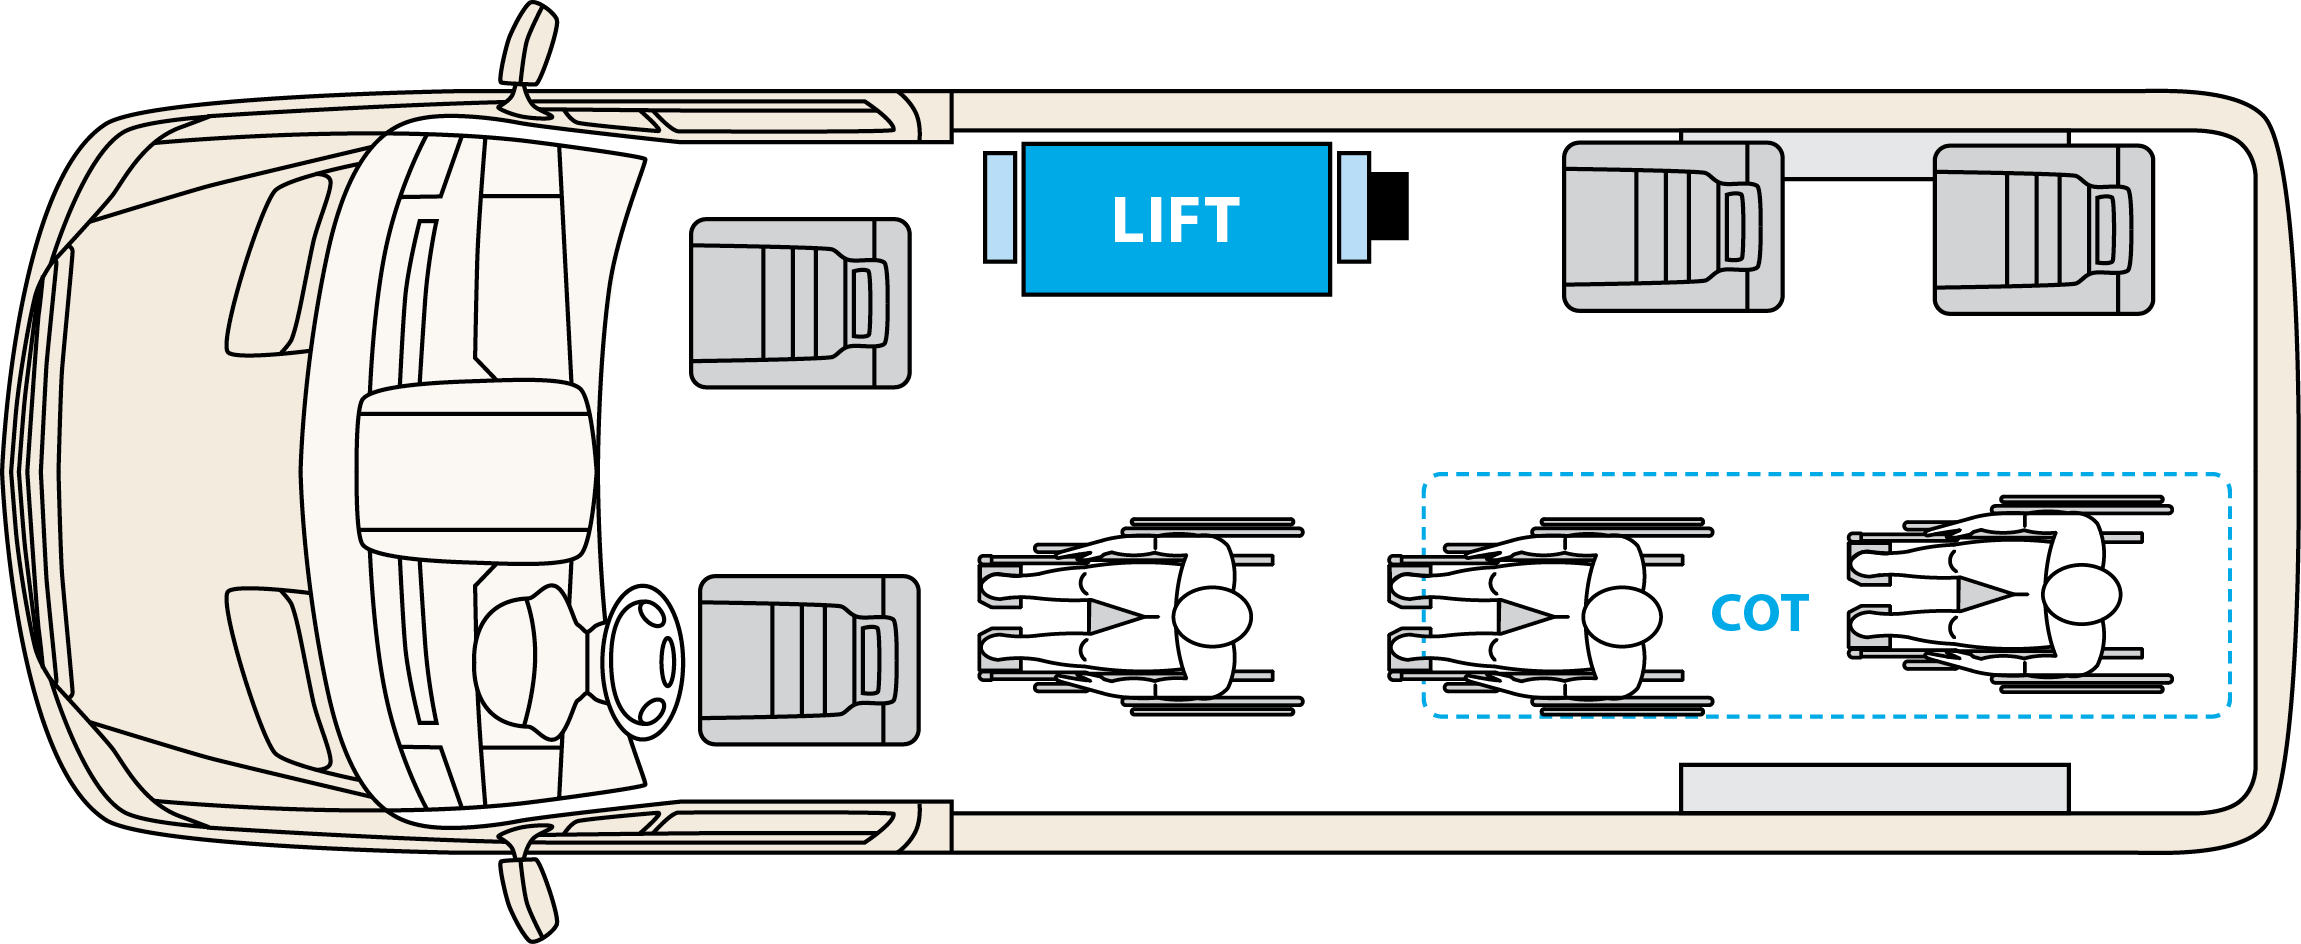 Driverge van layout with side entry